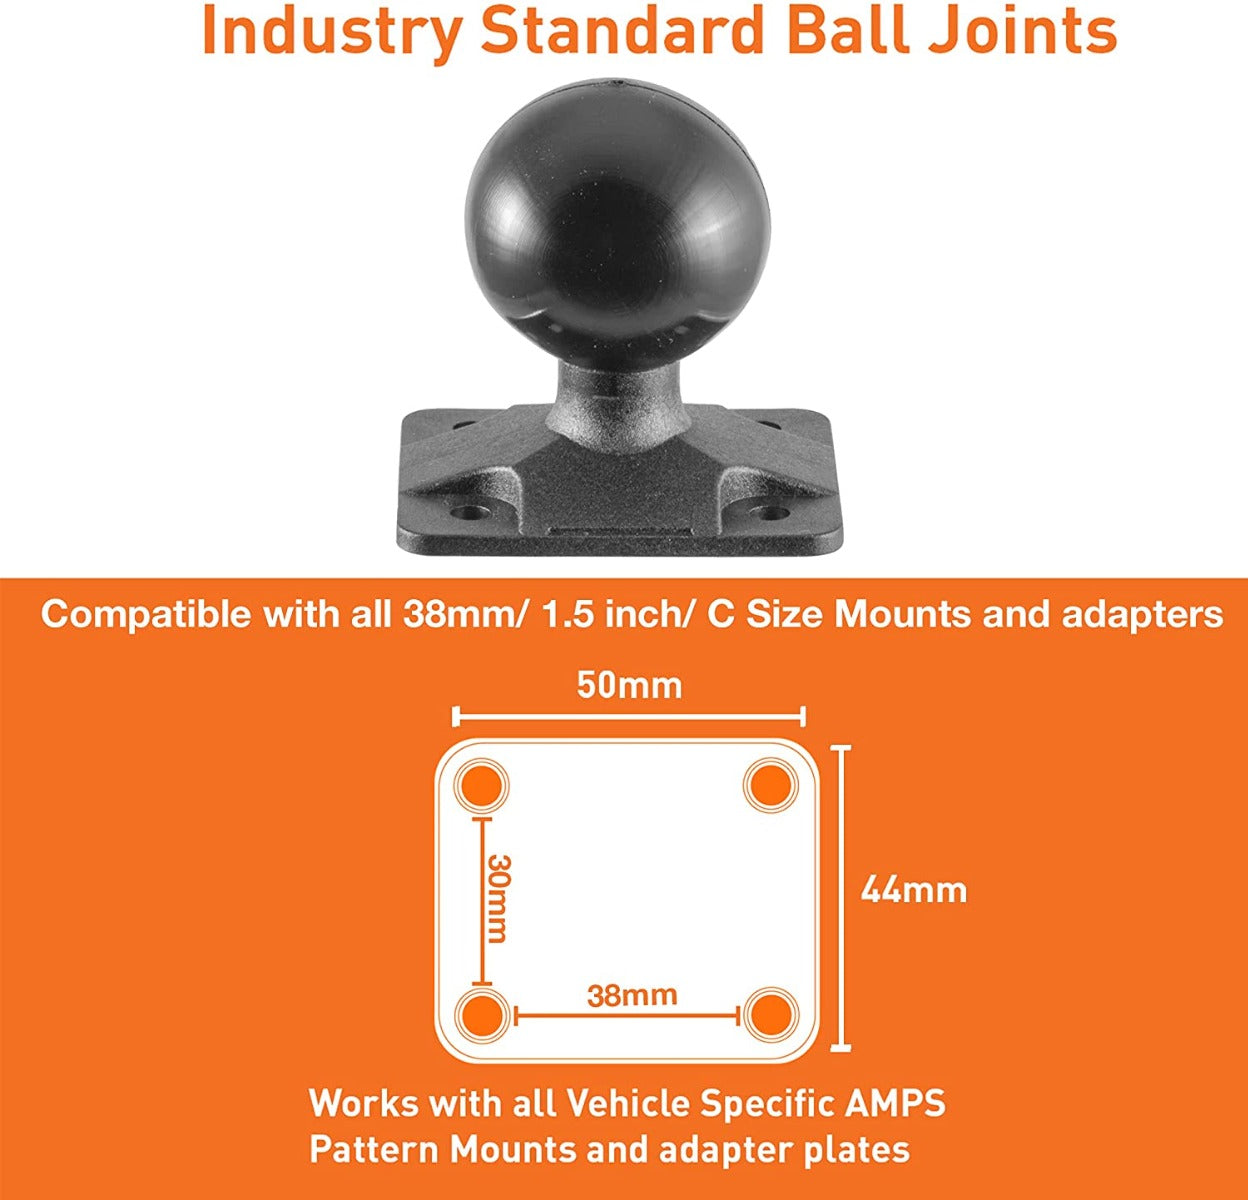 iBOLT™ 38mm / 1.5 inch Composite AMPS Adapter Plate